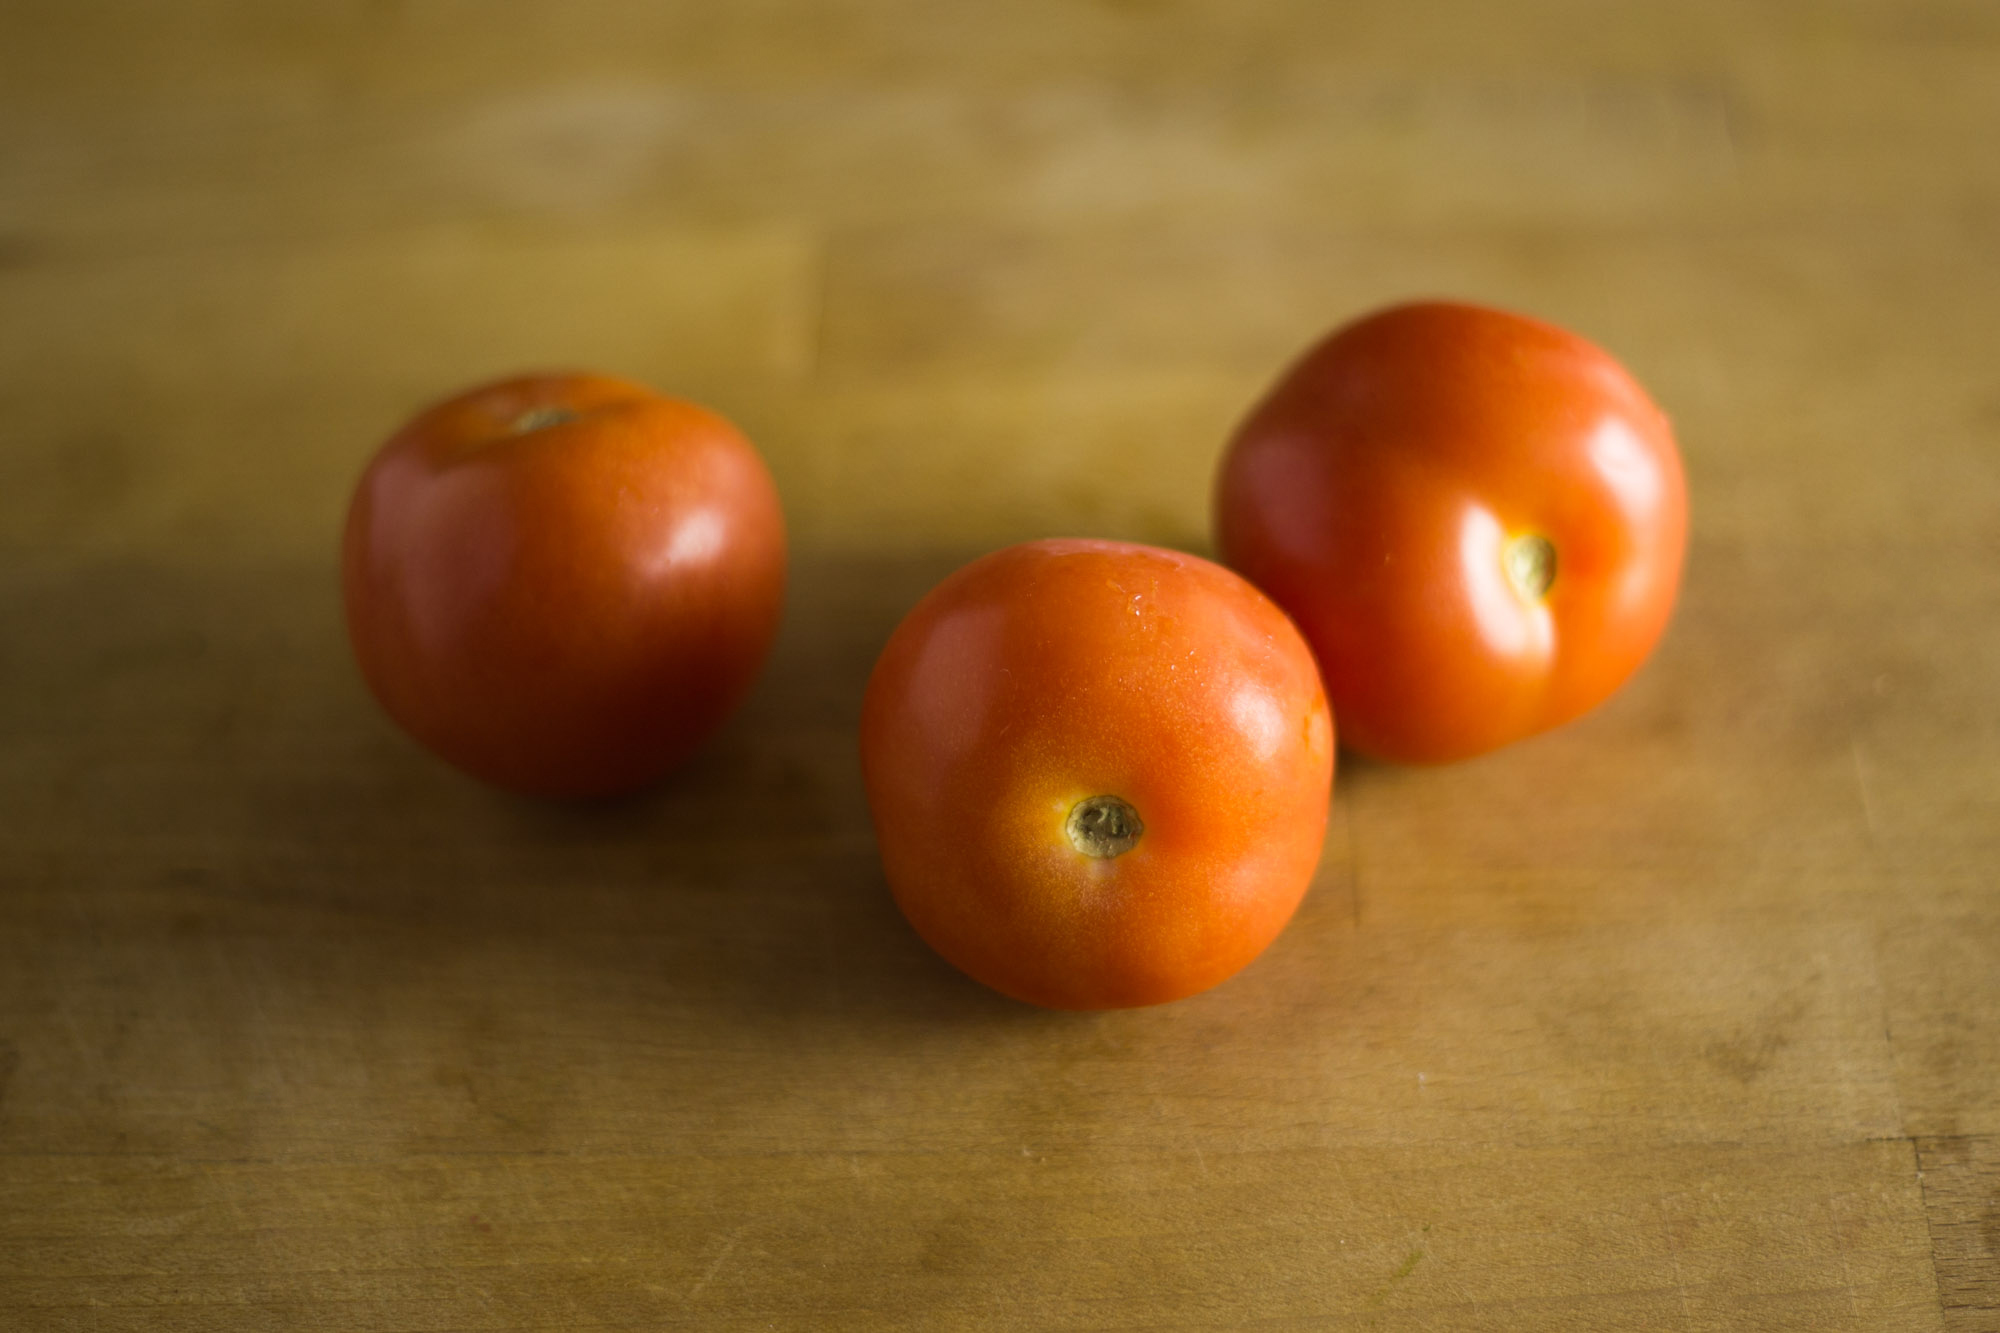 Tomatoes (Large Loose) - 500g